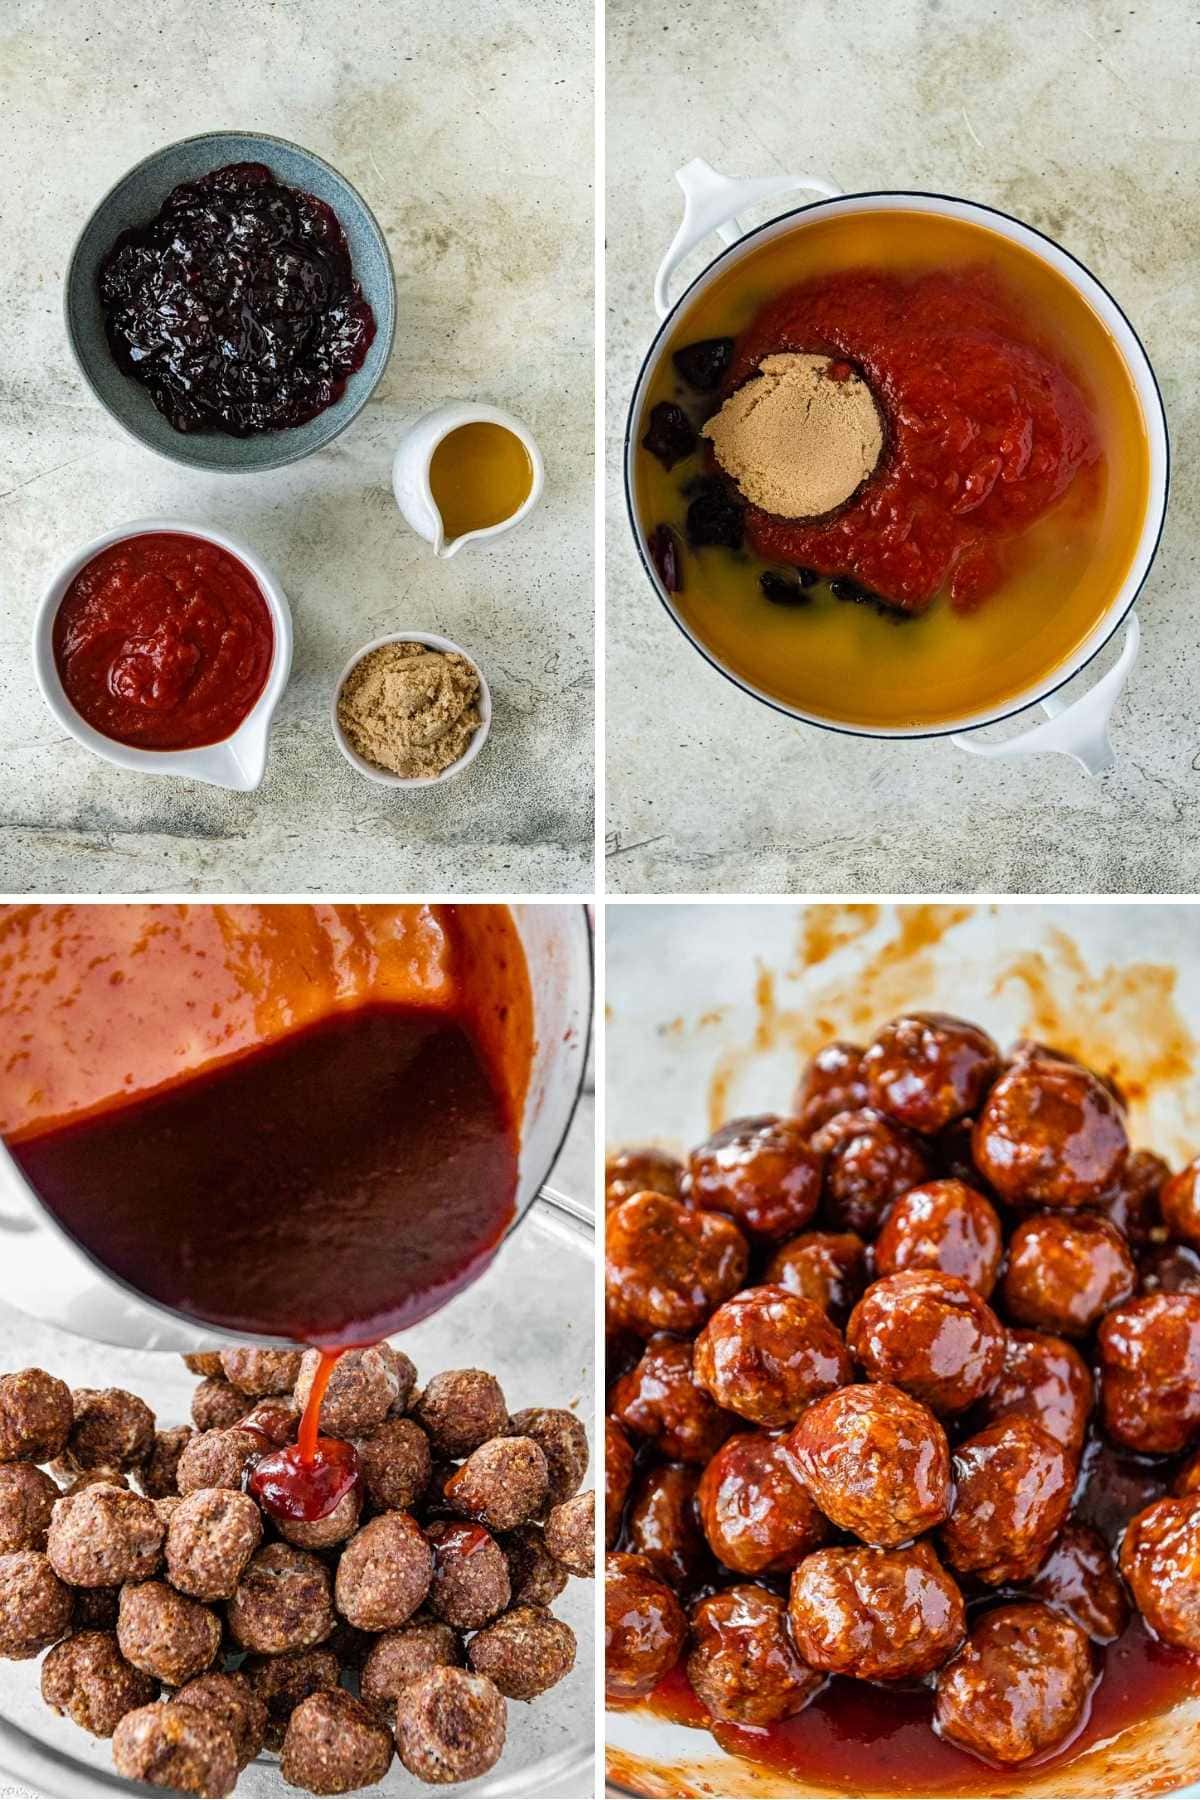 Cranberry Meatballs collage